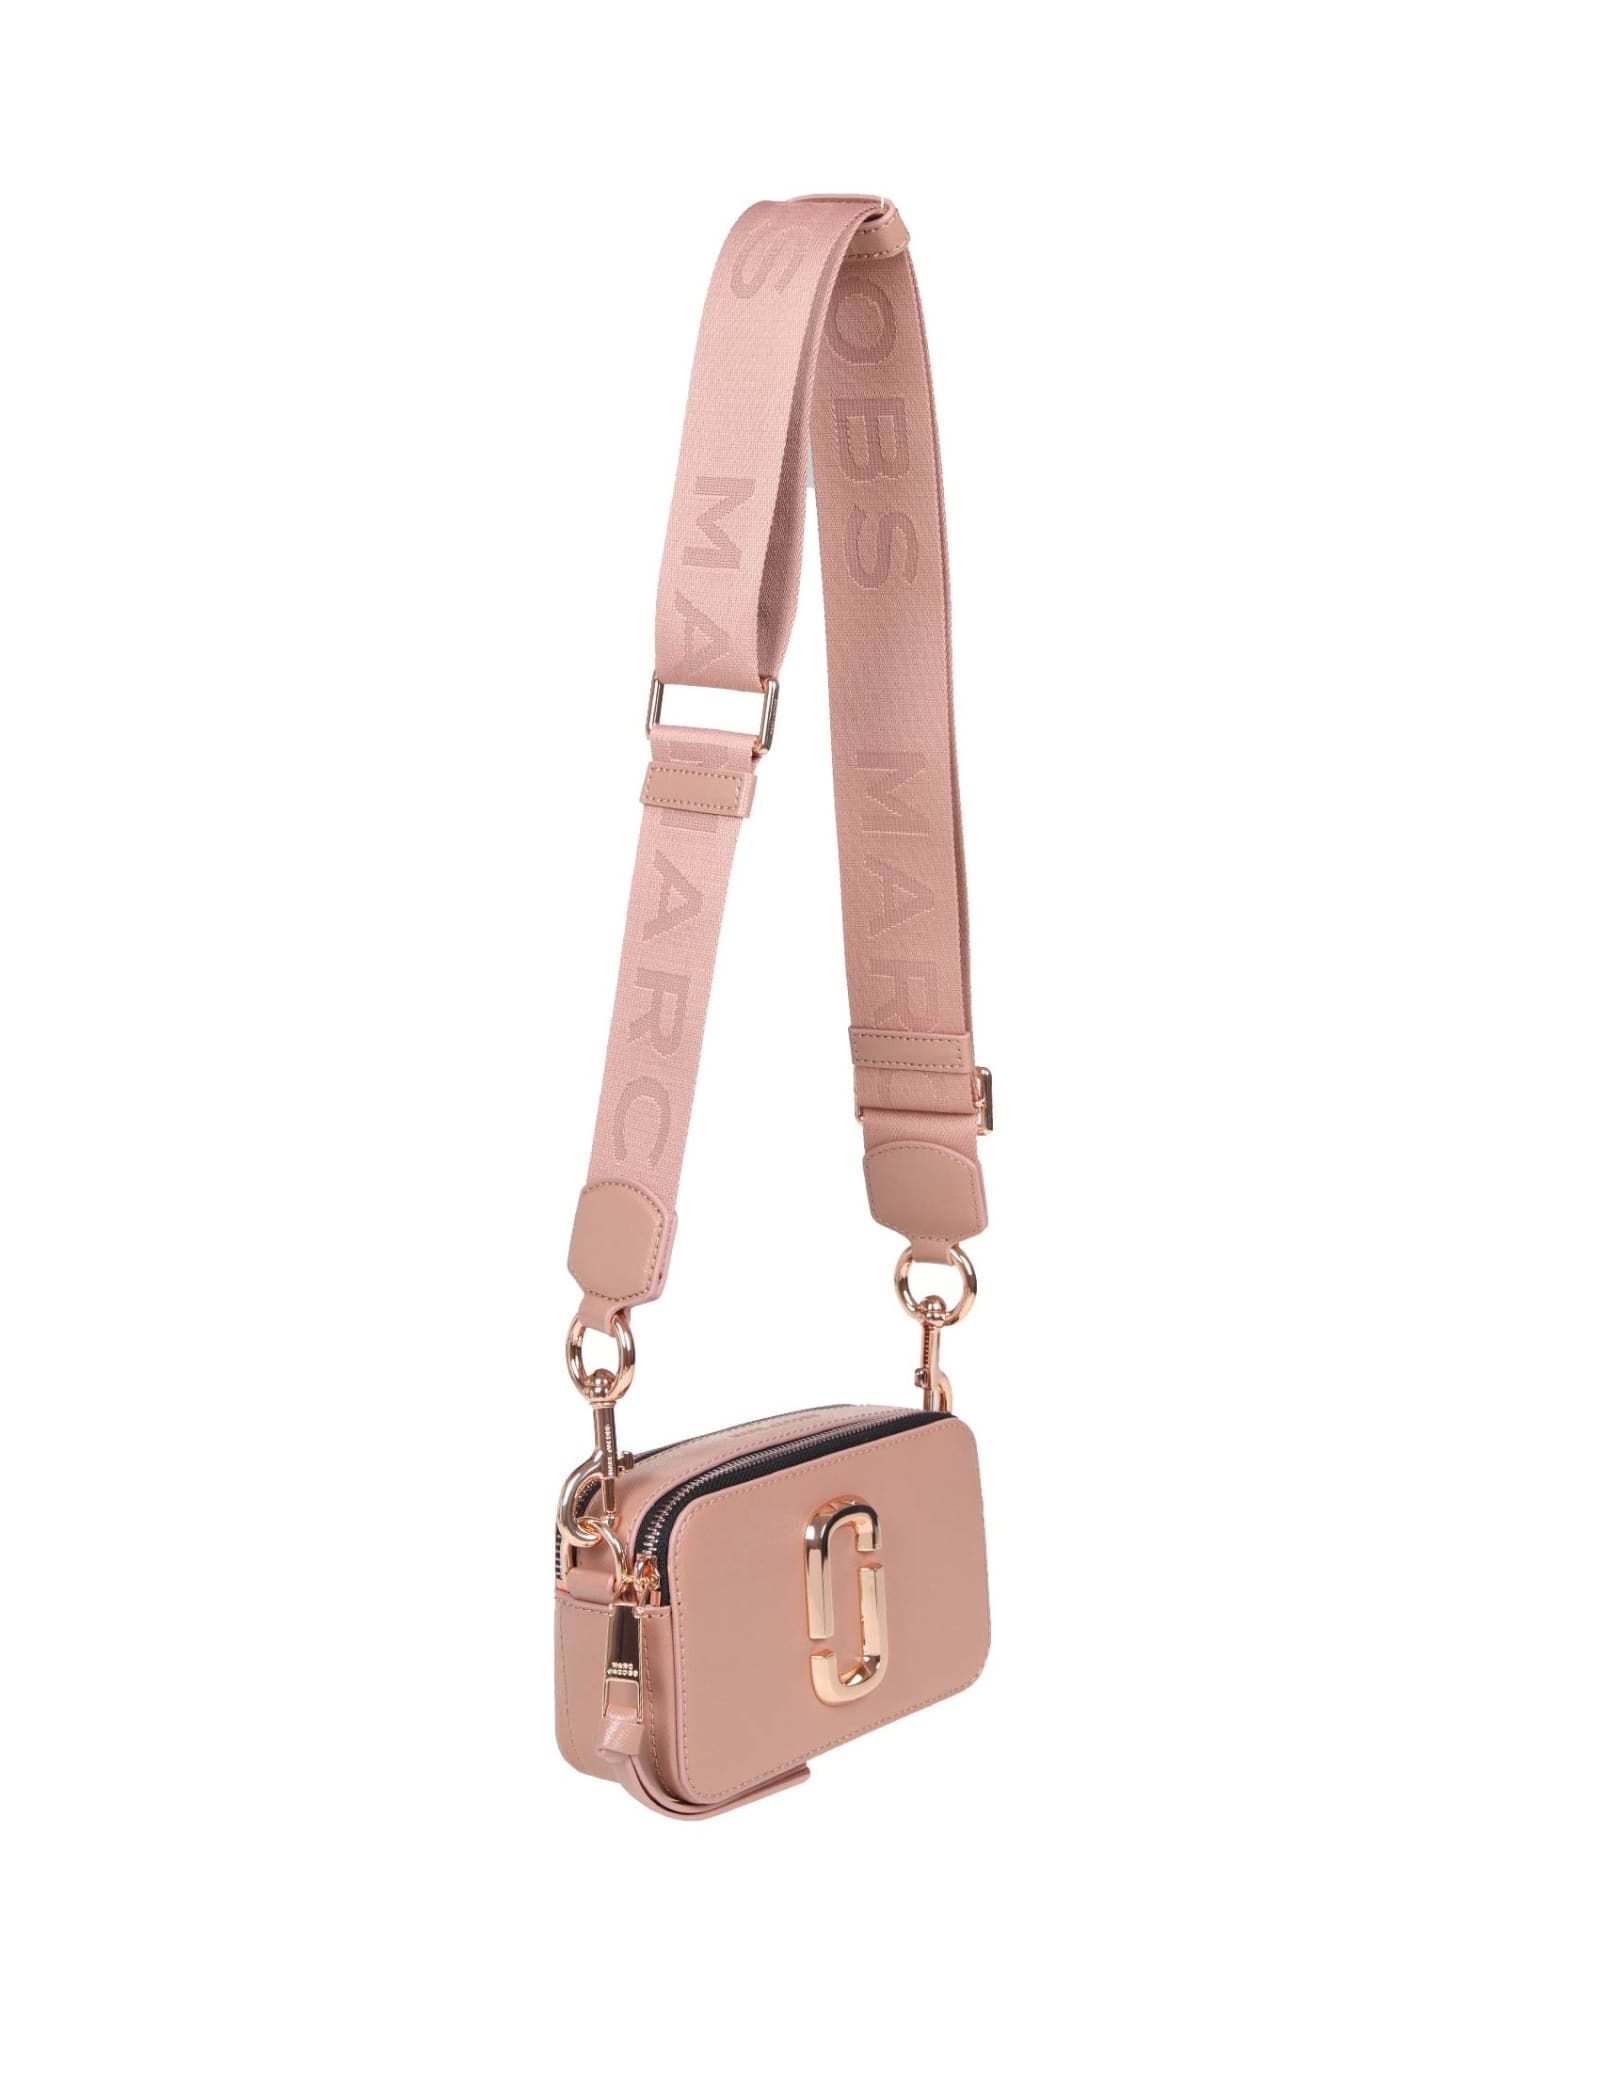 Marc Jacobs The Snapshot Camera Bag Sunkissed Pink in Leather with